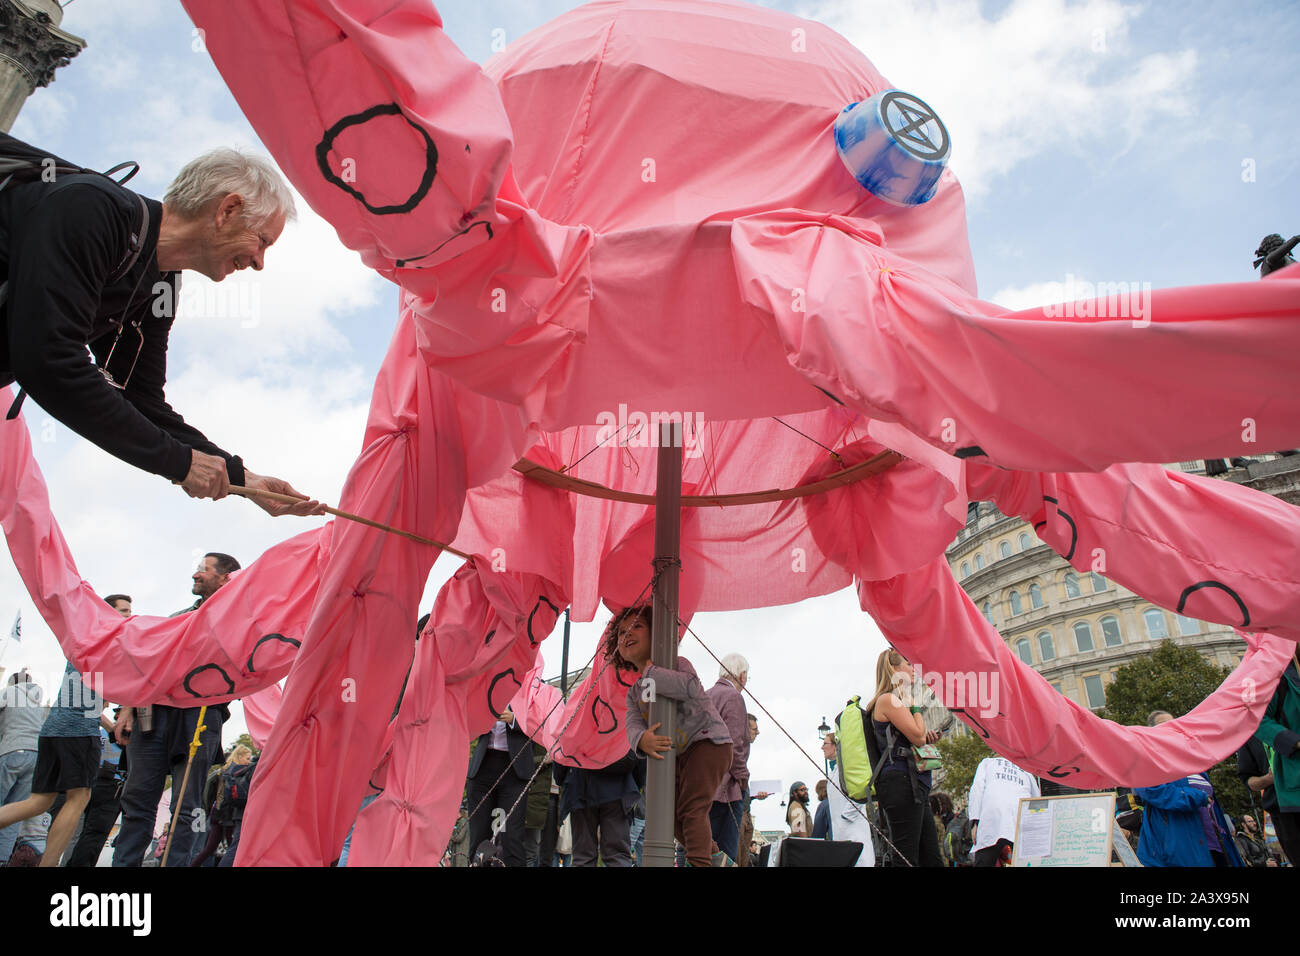 Westminster, London, UK. 10 October 2019. Environmental campaigners Extinction Rebellion have started two weeks protests from 7th to 20th October in and around London to demonstrate against climate change. The protesters in Trafalgar Square demand decisive action from the UK Government on the global environmental crisis. The controversial pink Octopus is moved around in the square. Stock Photo